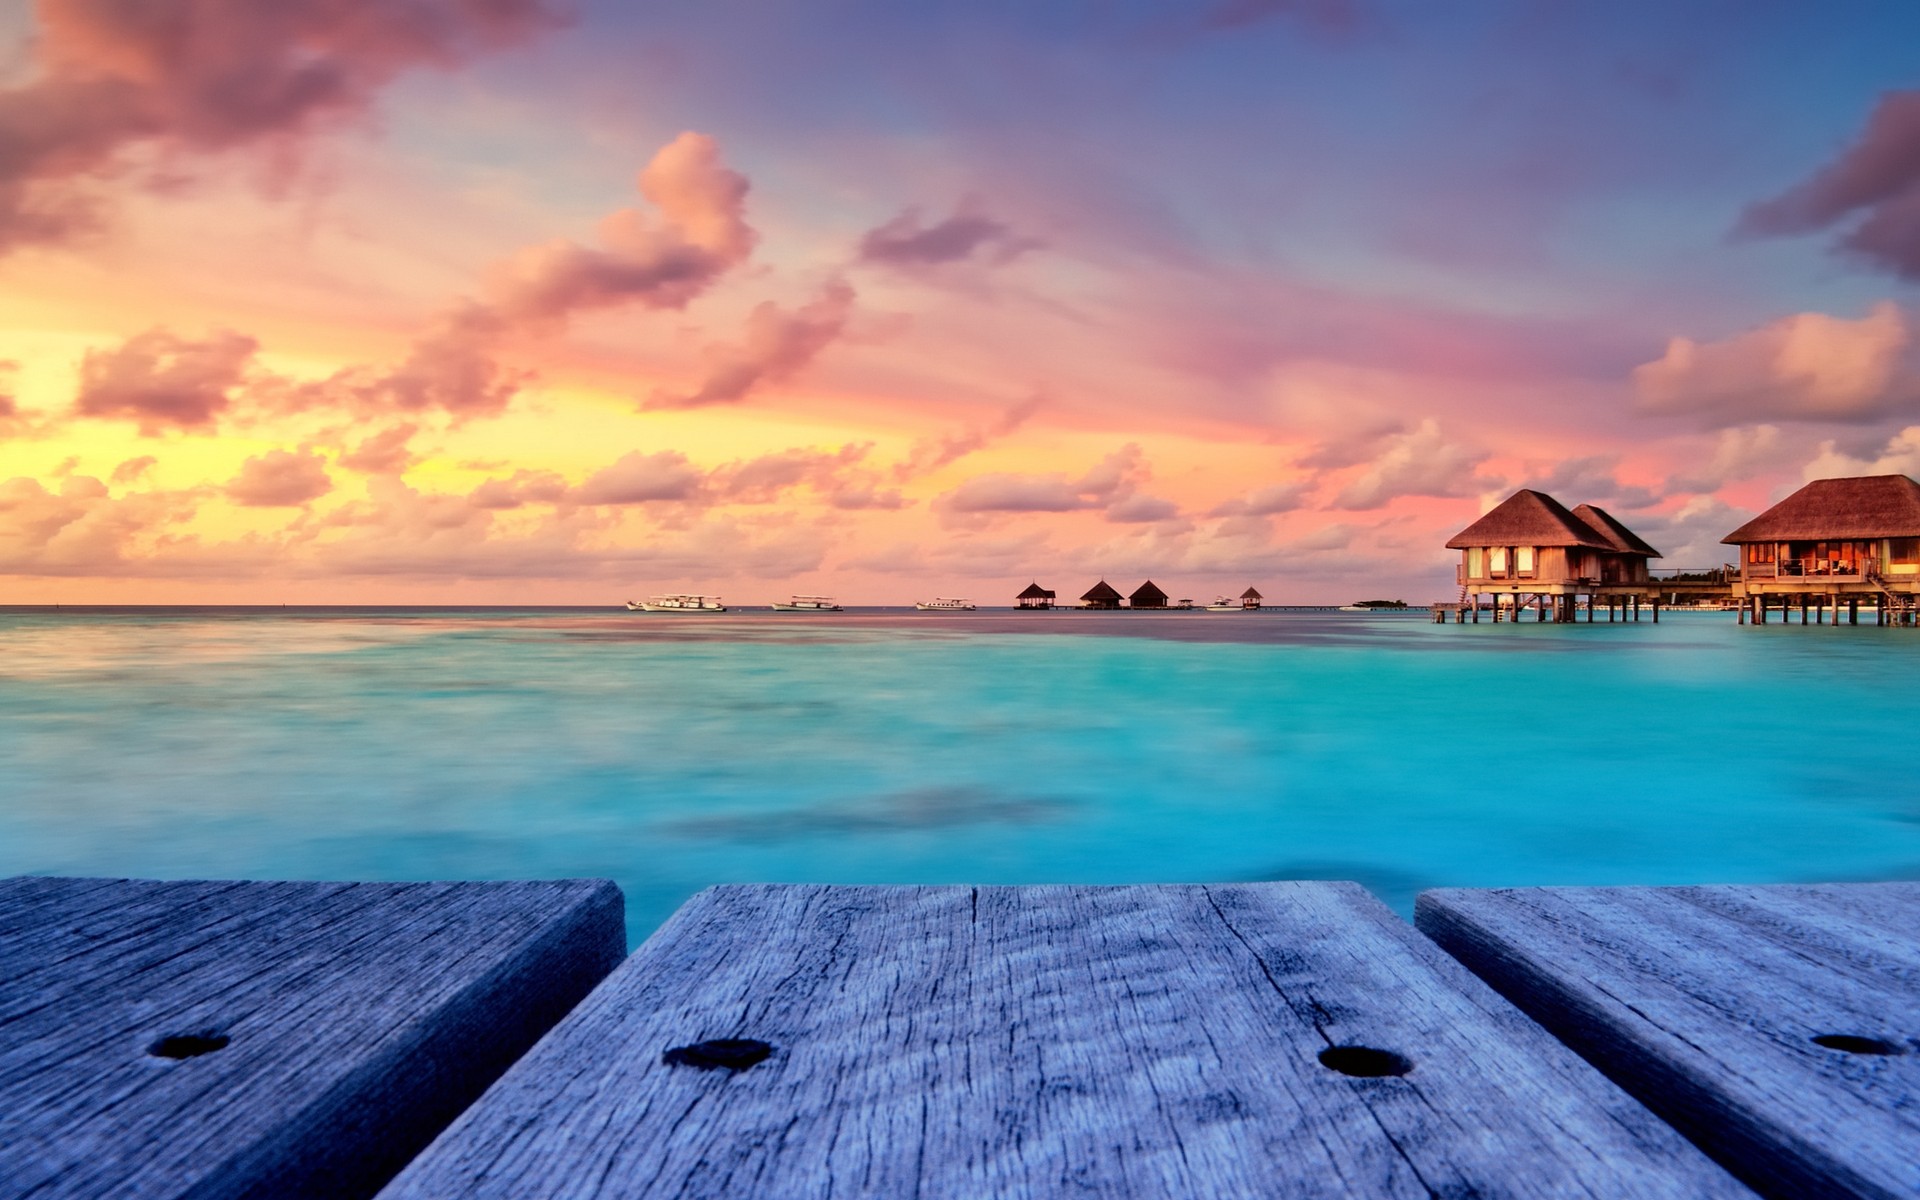 General 1920x1200 tropical beach nature sunset landscape bungalow Maldives resort sky walkway island clouds turquoise water pier pink